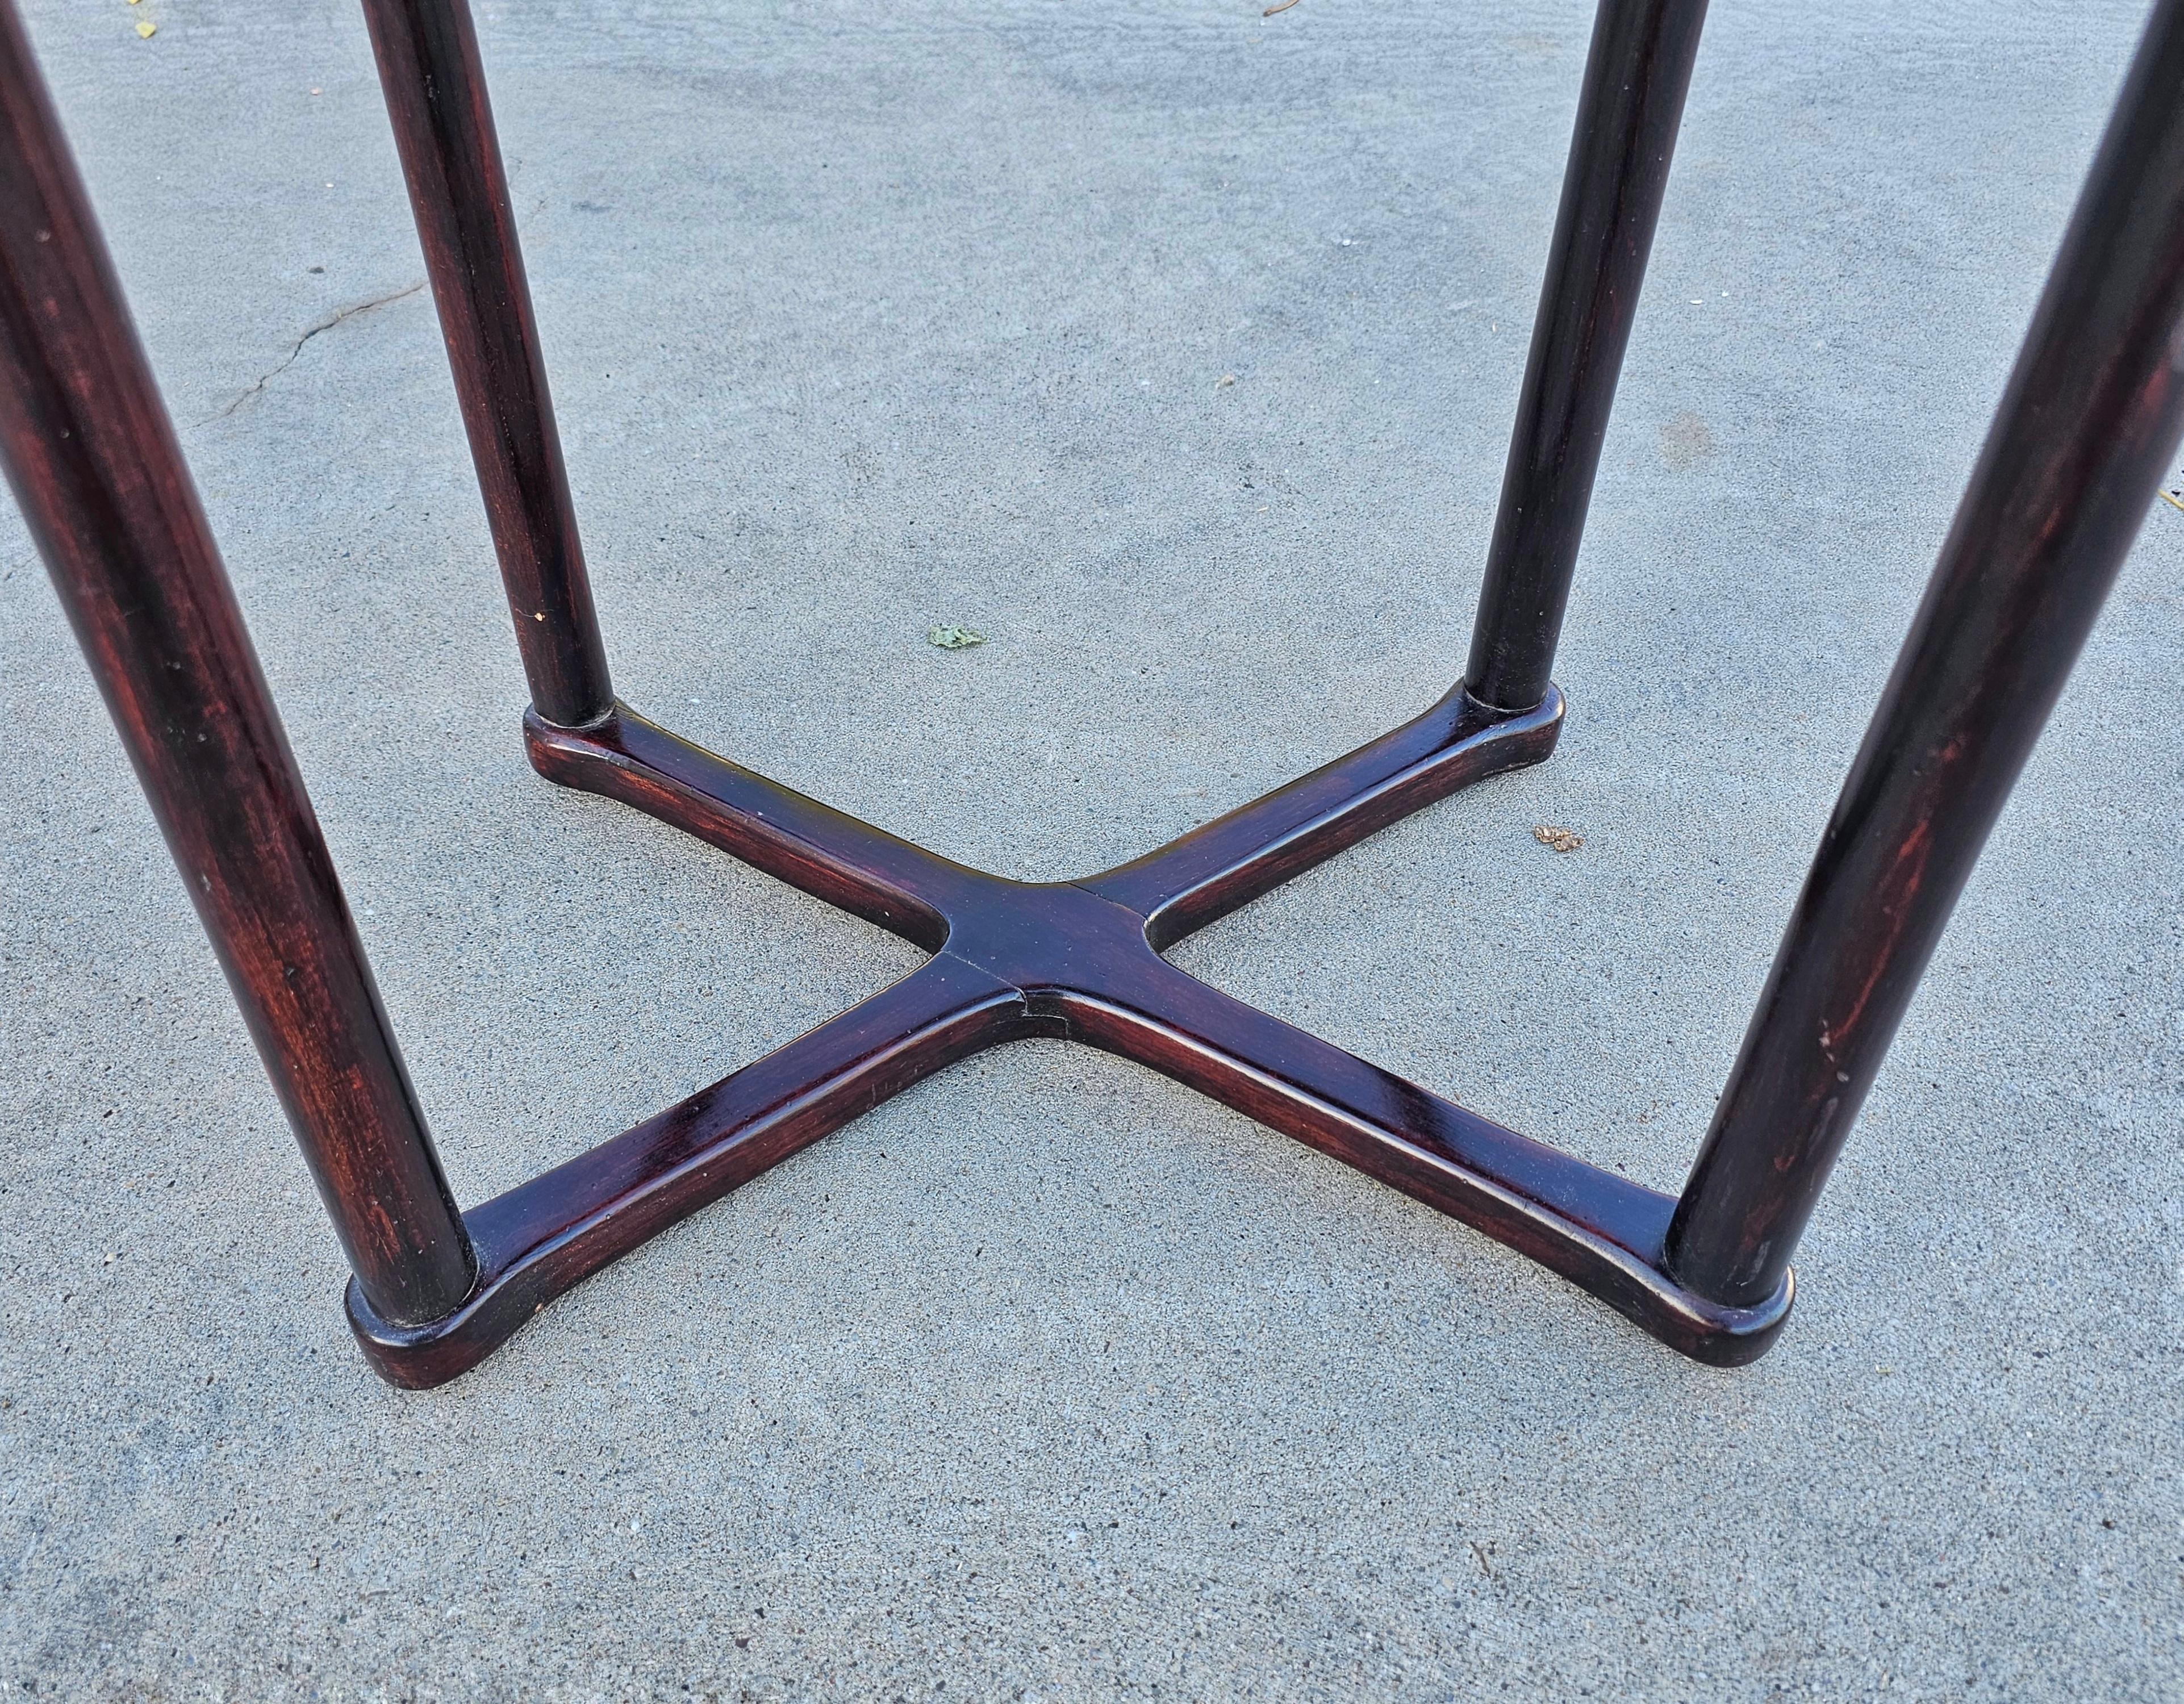 Beech Vienna Secession Oval Side Table Model 960/2 designed by Josef Hoffmann, 1910s For Sale